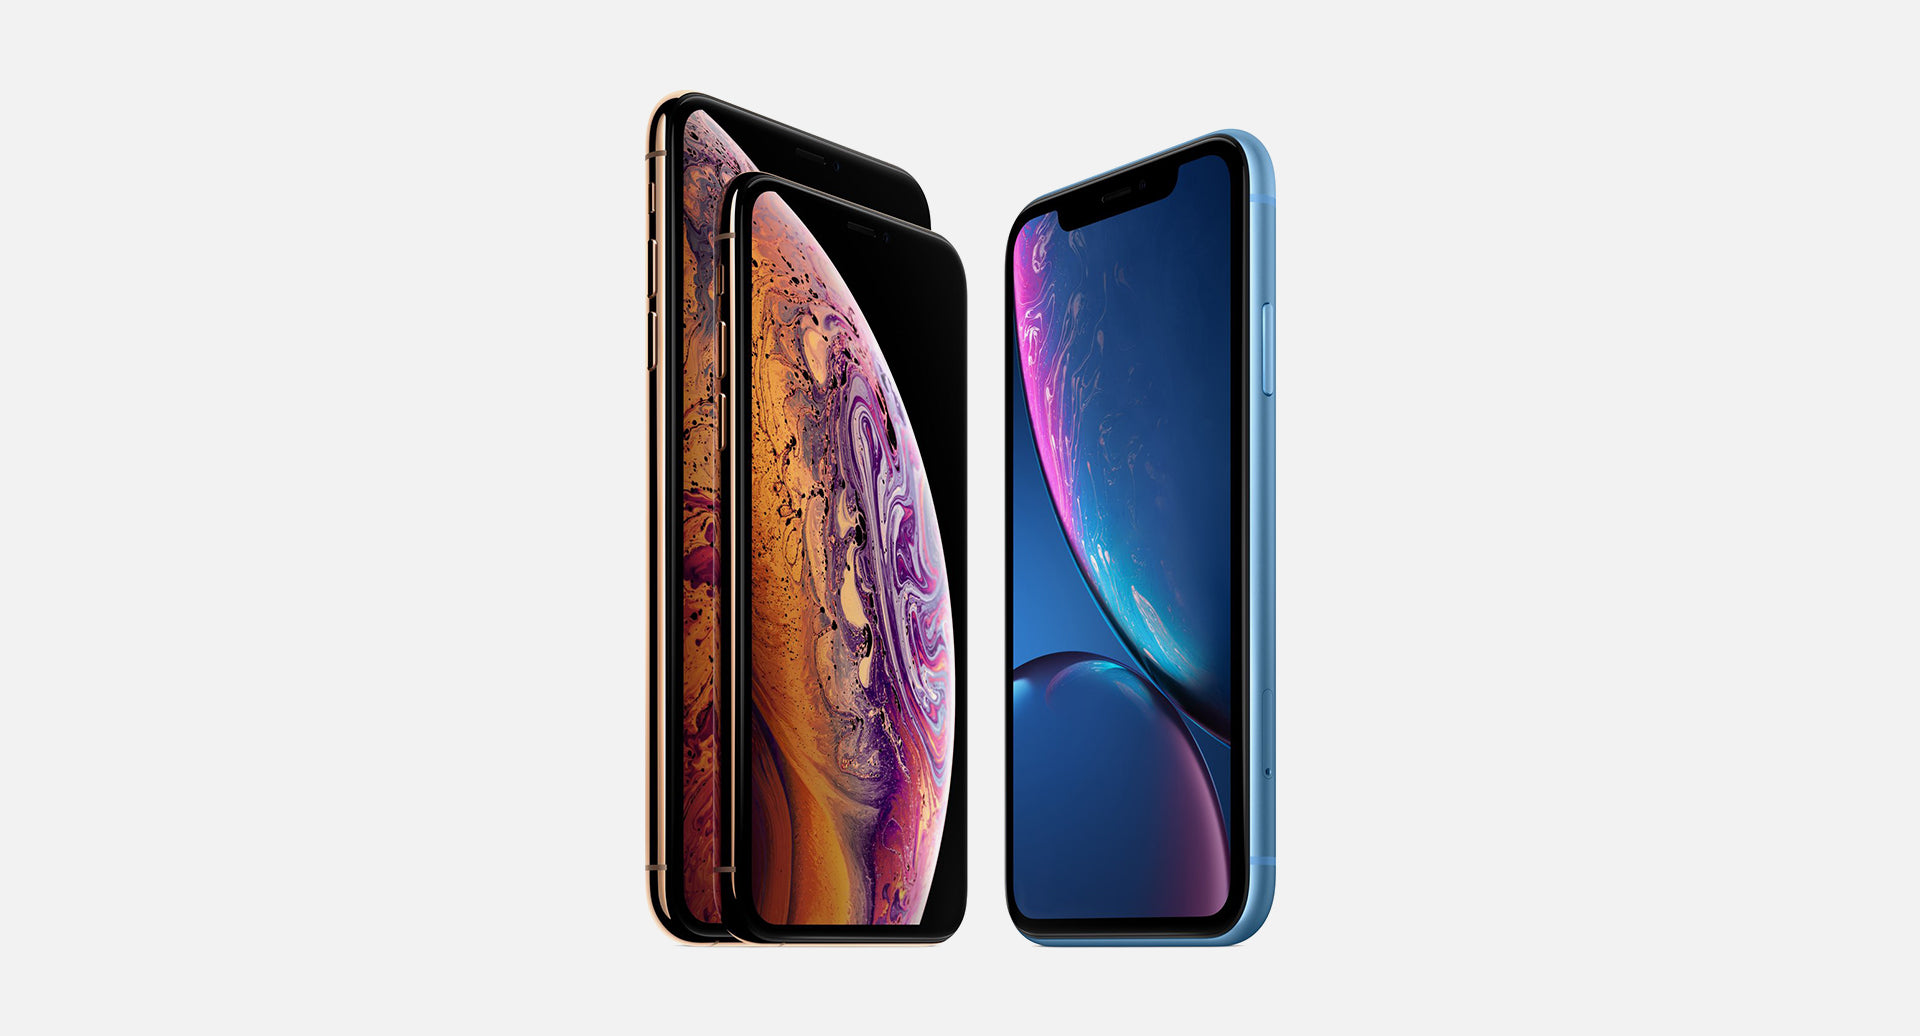 Smart Battery Case Replacement Program for iPhone XS, iPhone XS Max, and iPhone XR